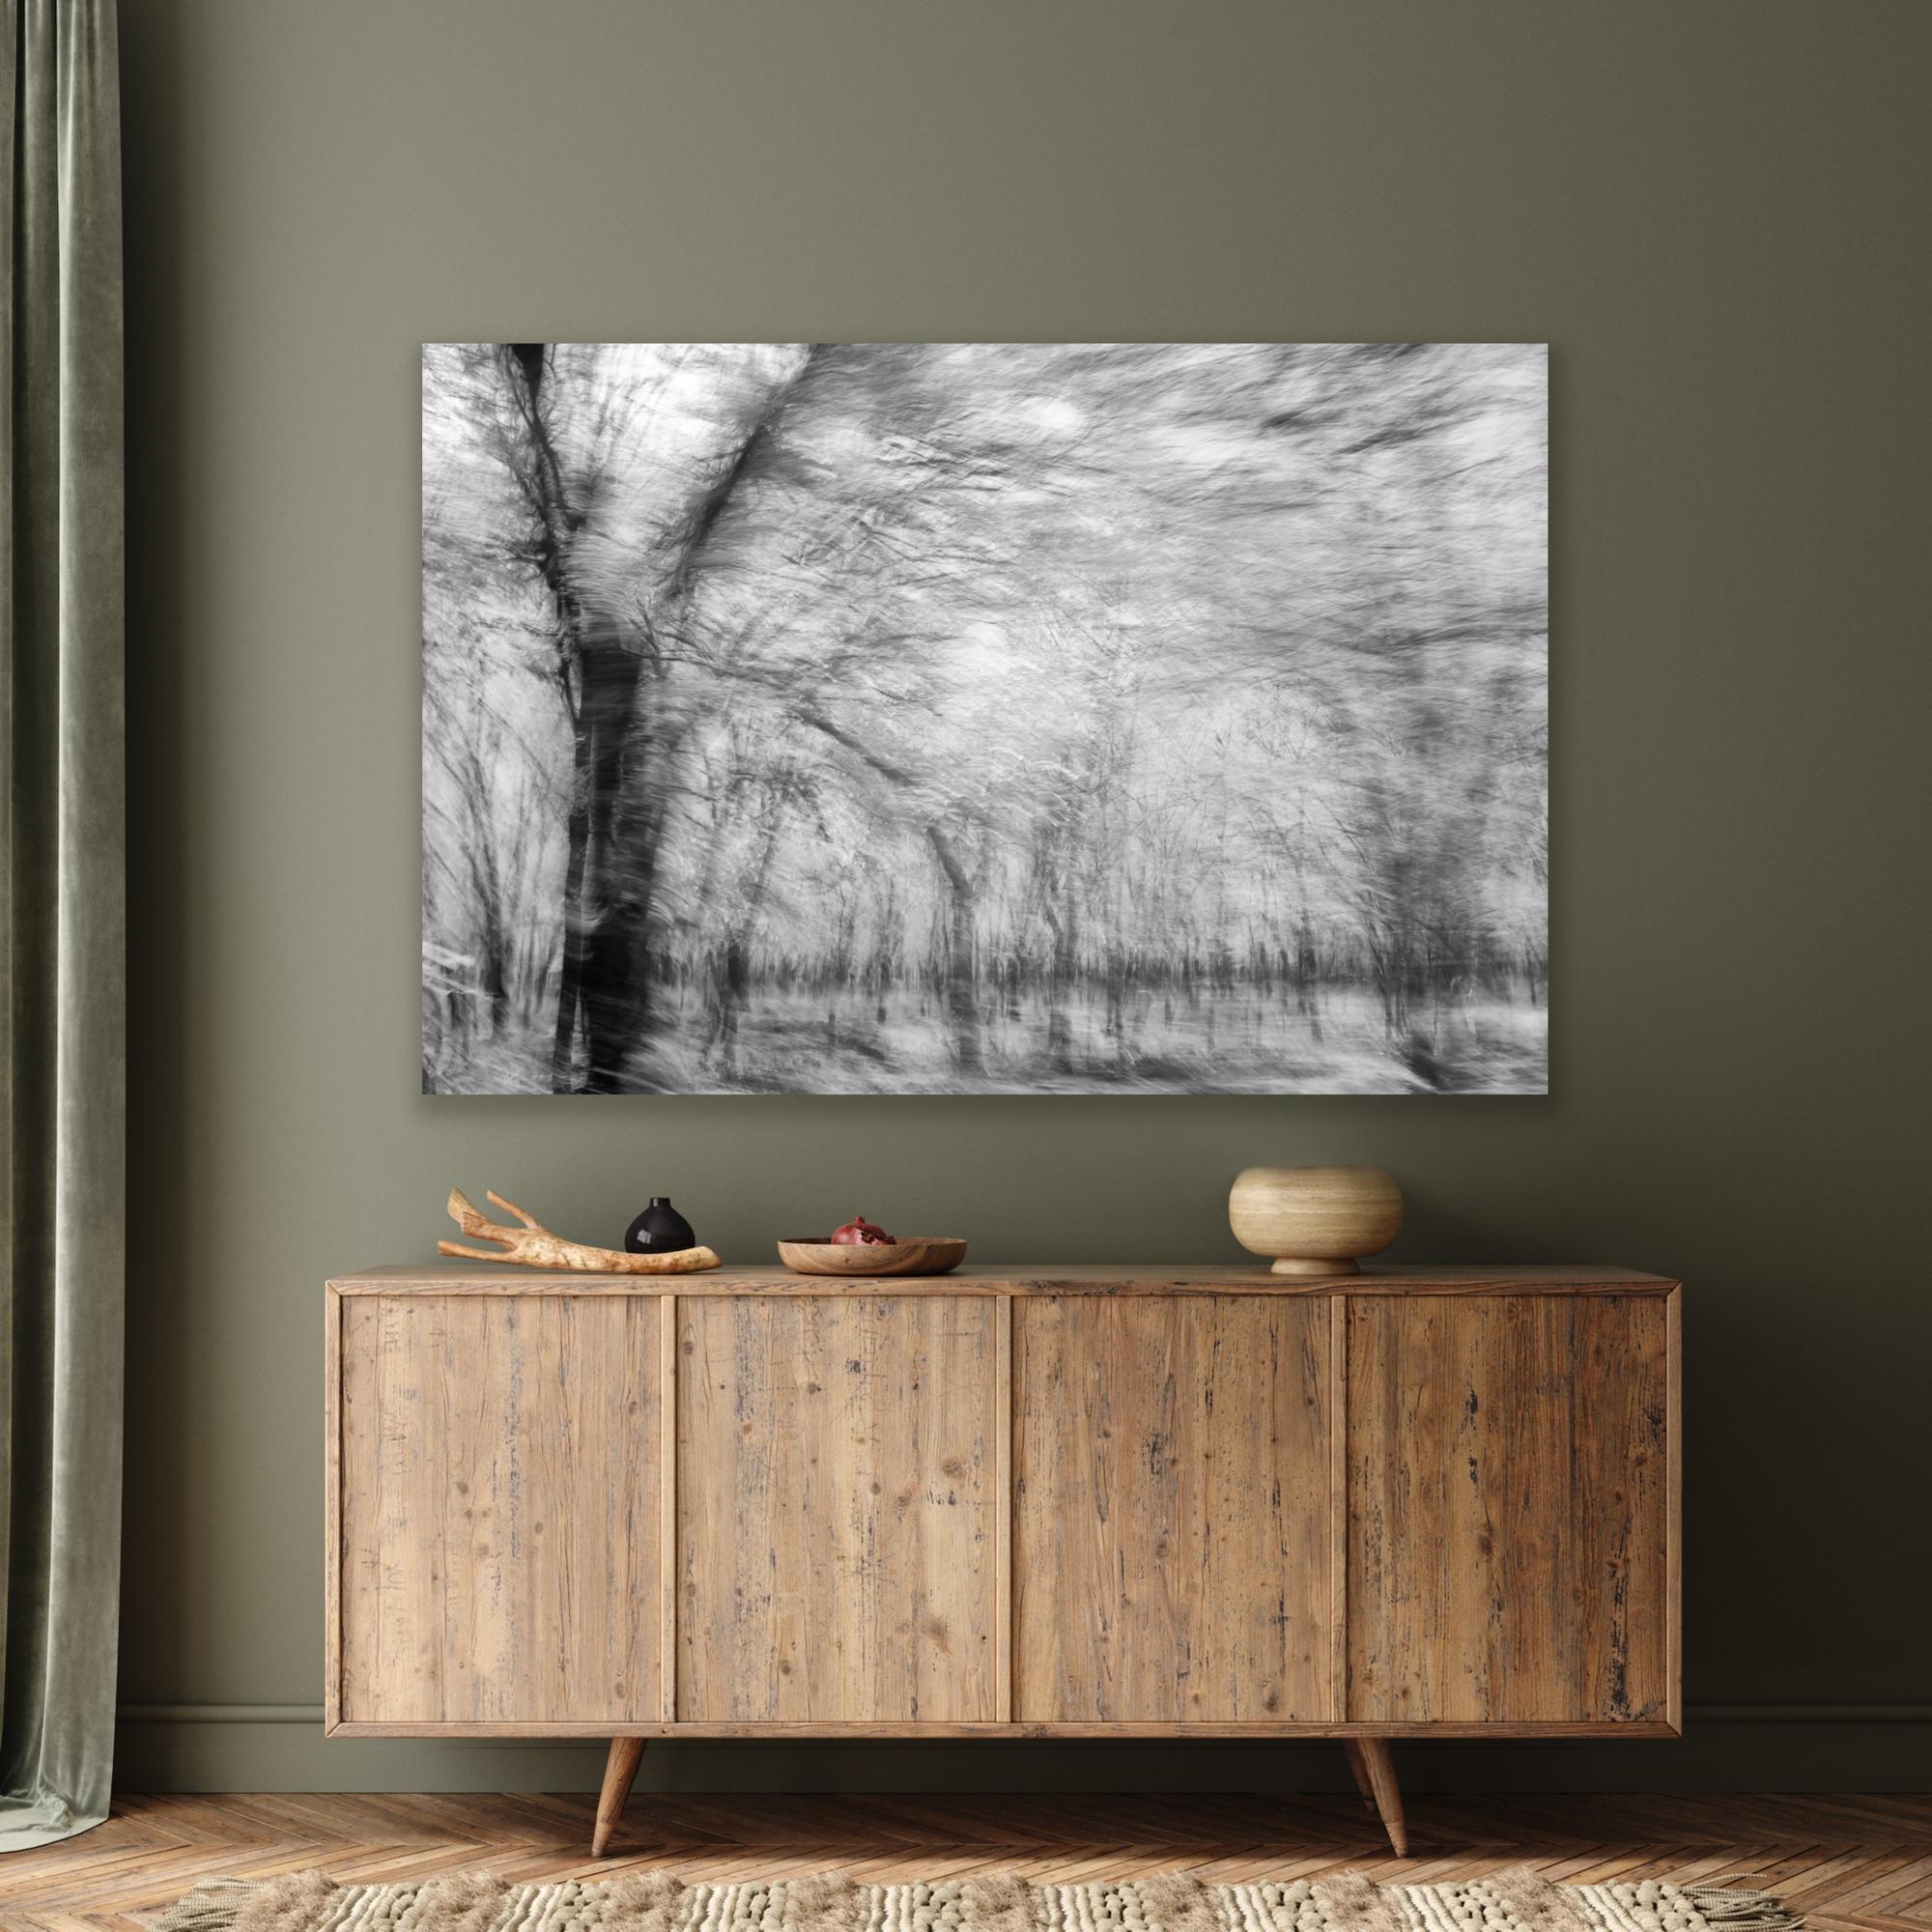  Landscape Photograph Nature Large Abstract Trees Wildlife India Black White For Sale 9